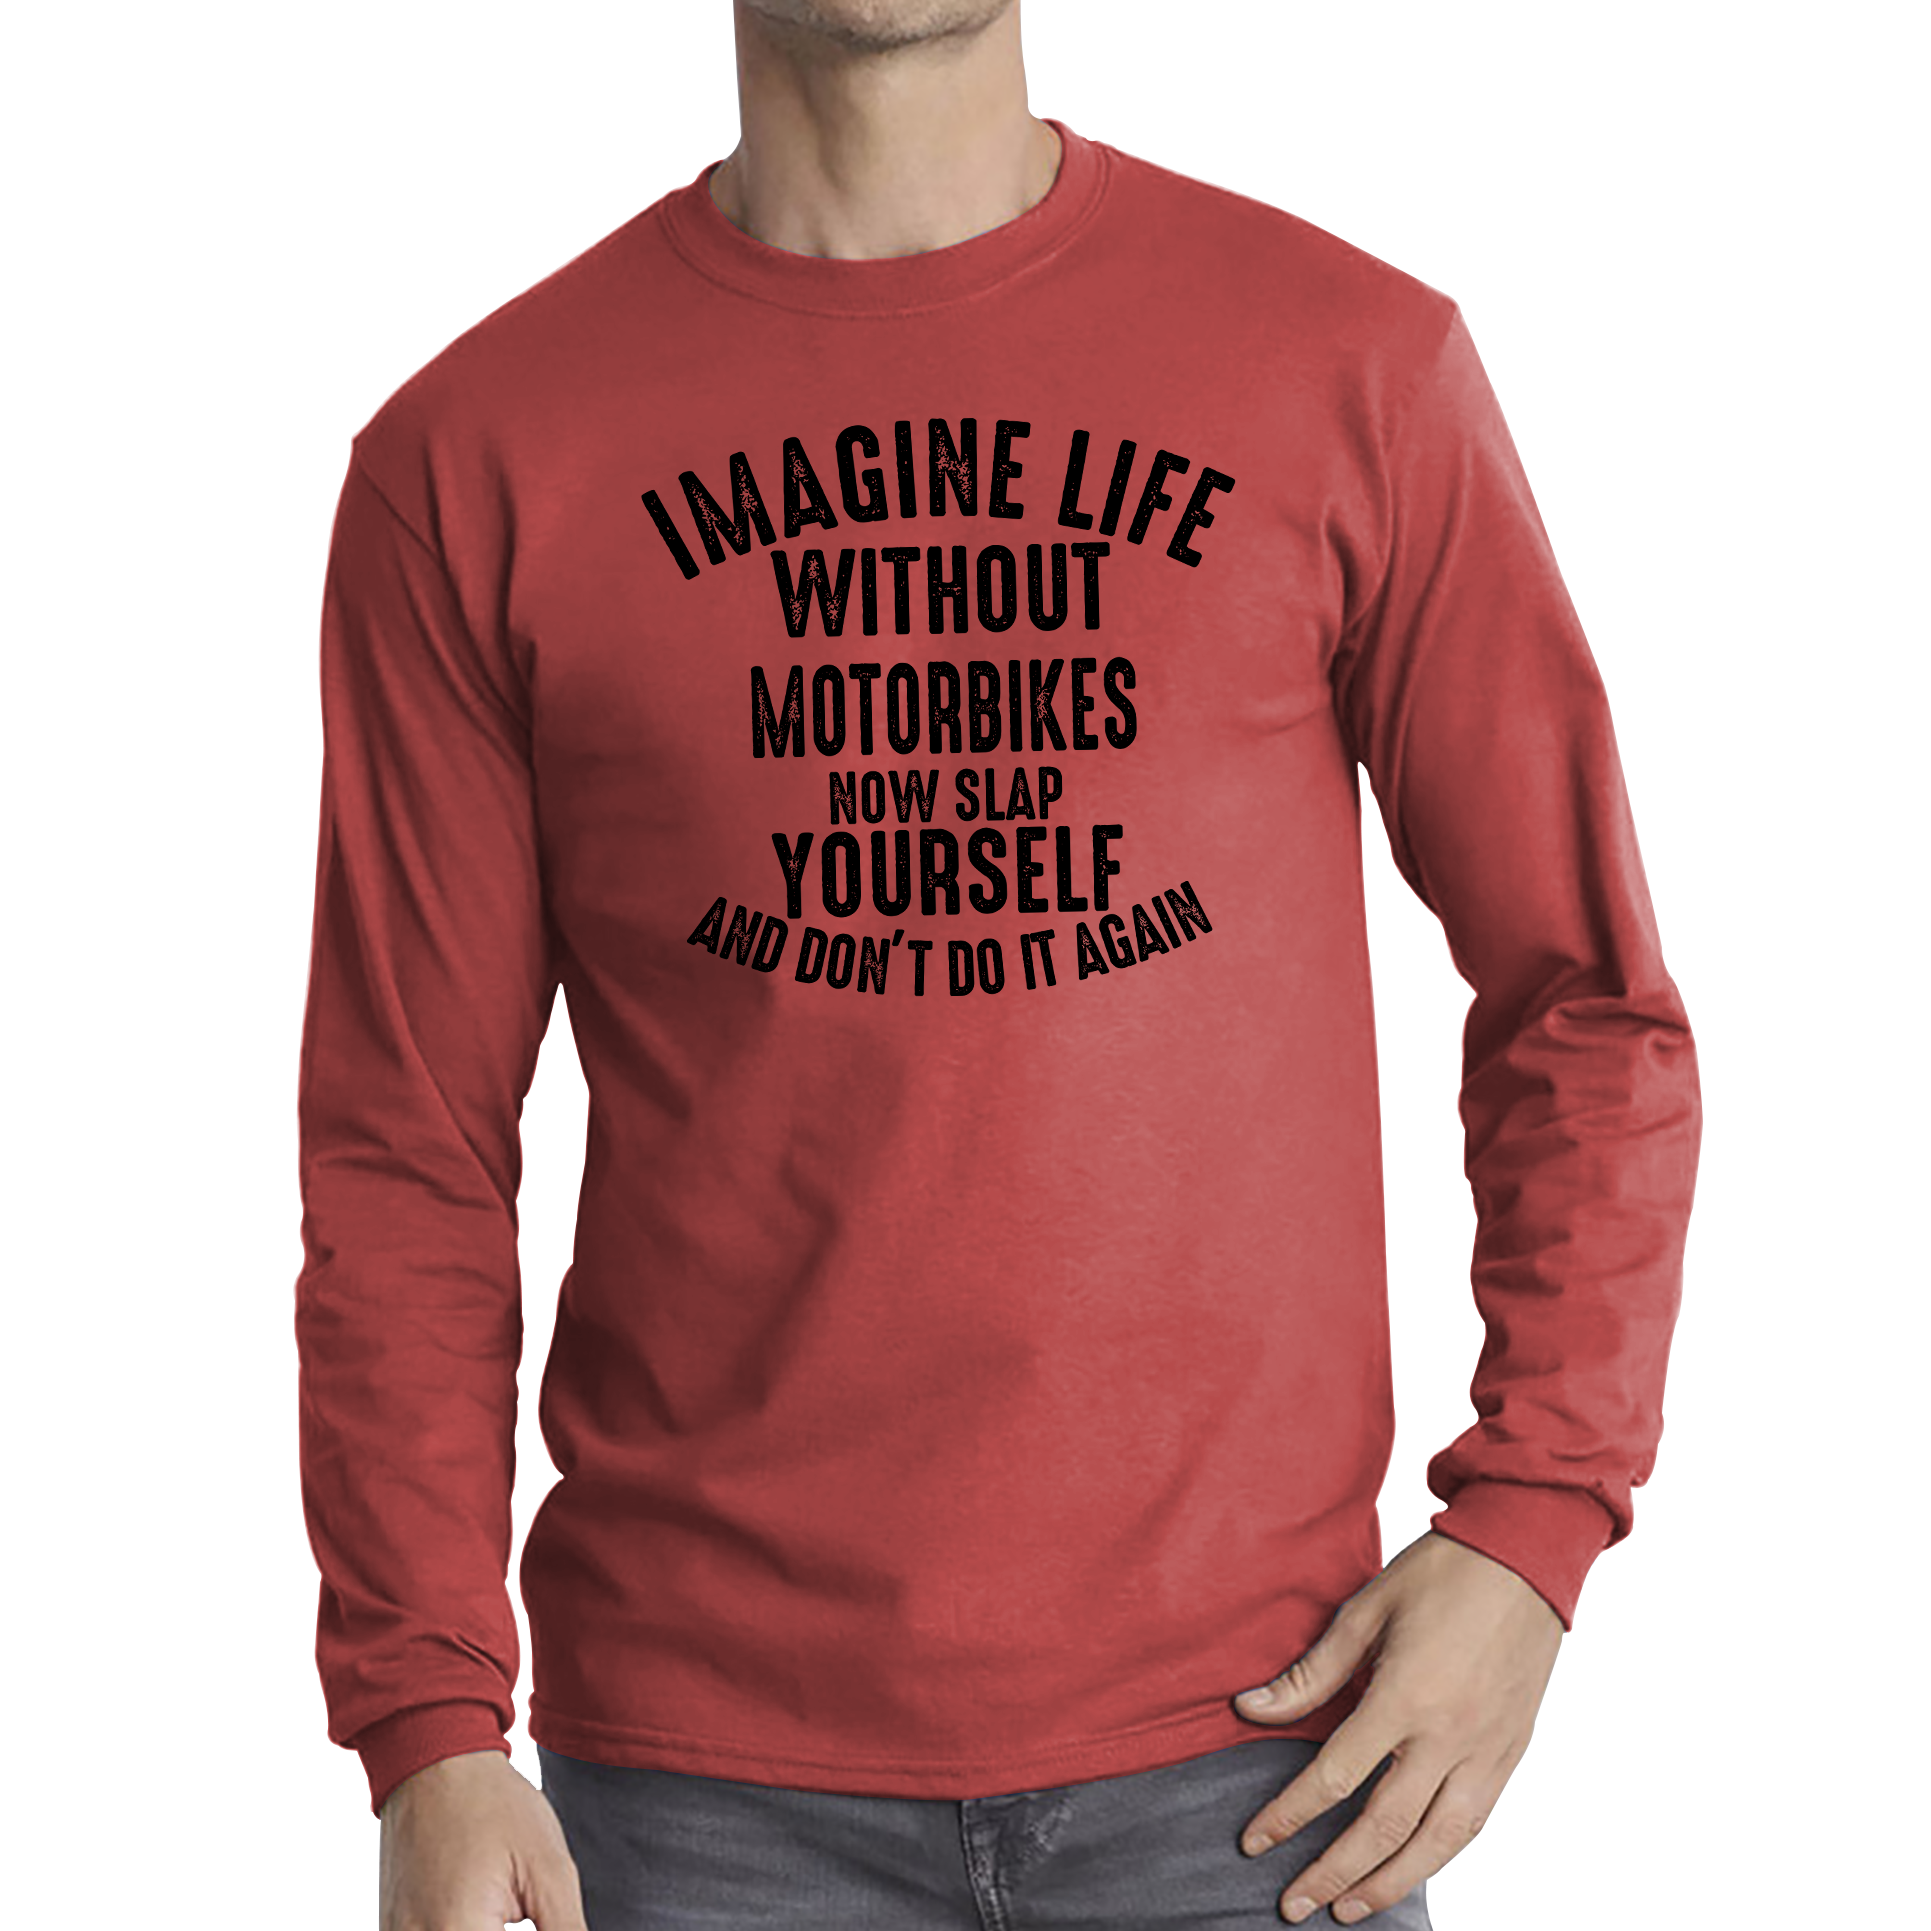 Imagine Life Without Motorbikes Now Slap Yourself And Don' Do It Again Shirt Bike Lovers Racers Riders Funny Joke Long Sleeve T Shirt